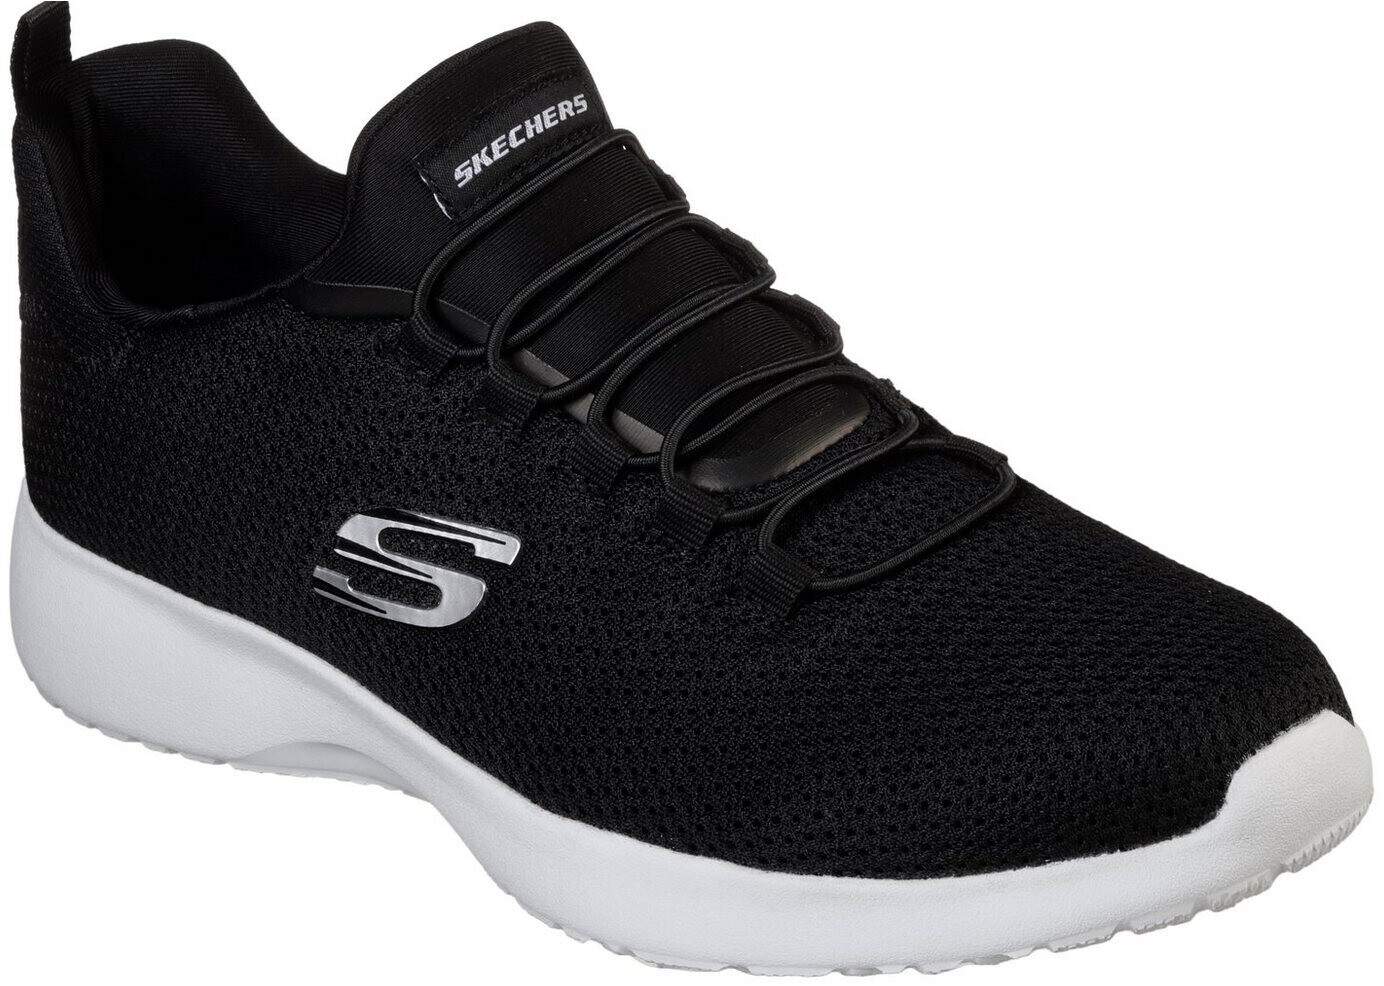 Buy Skechers Dynamight blue/grey (58360) from £34.99 (Today 